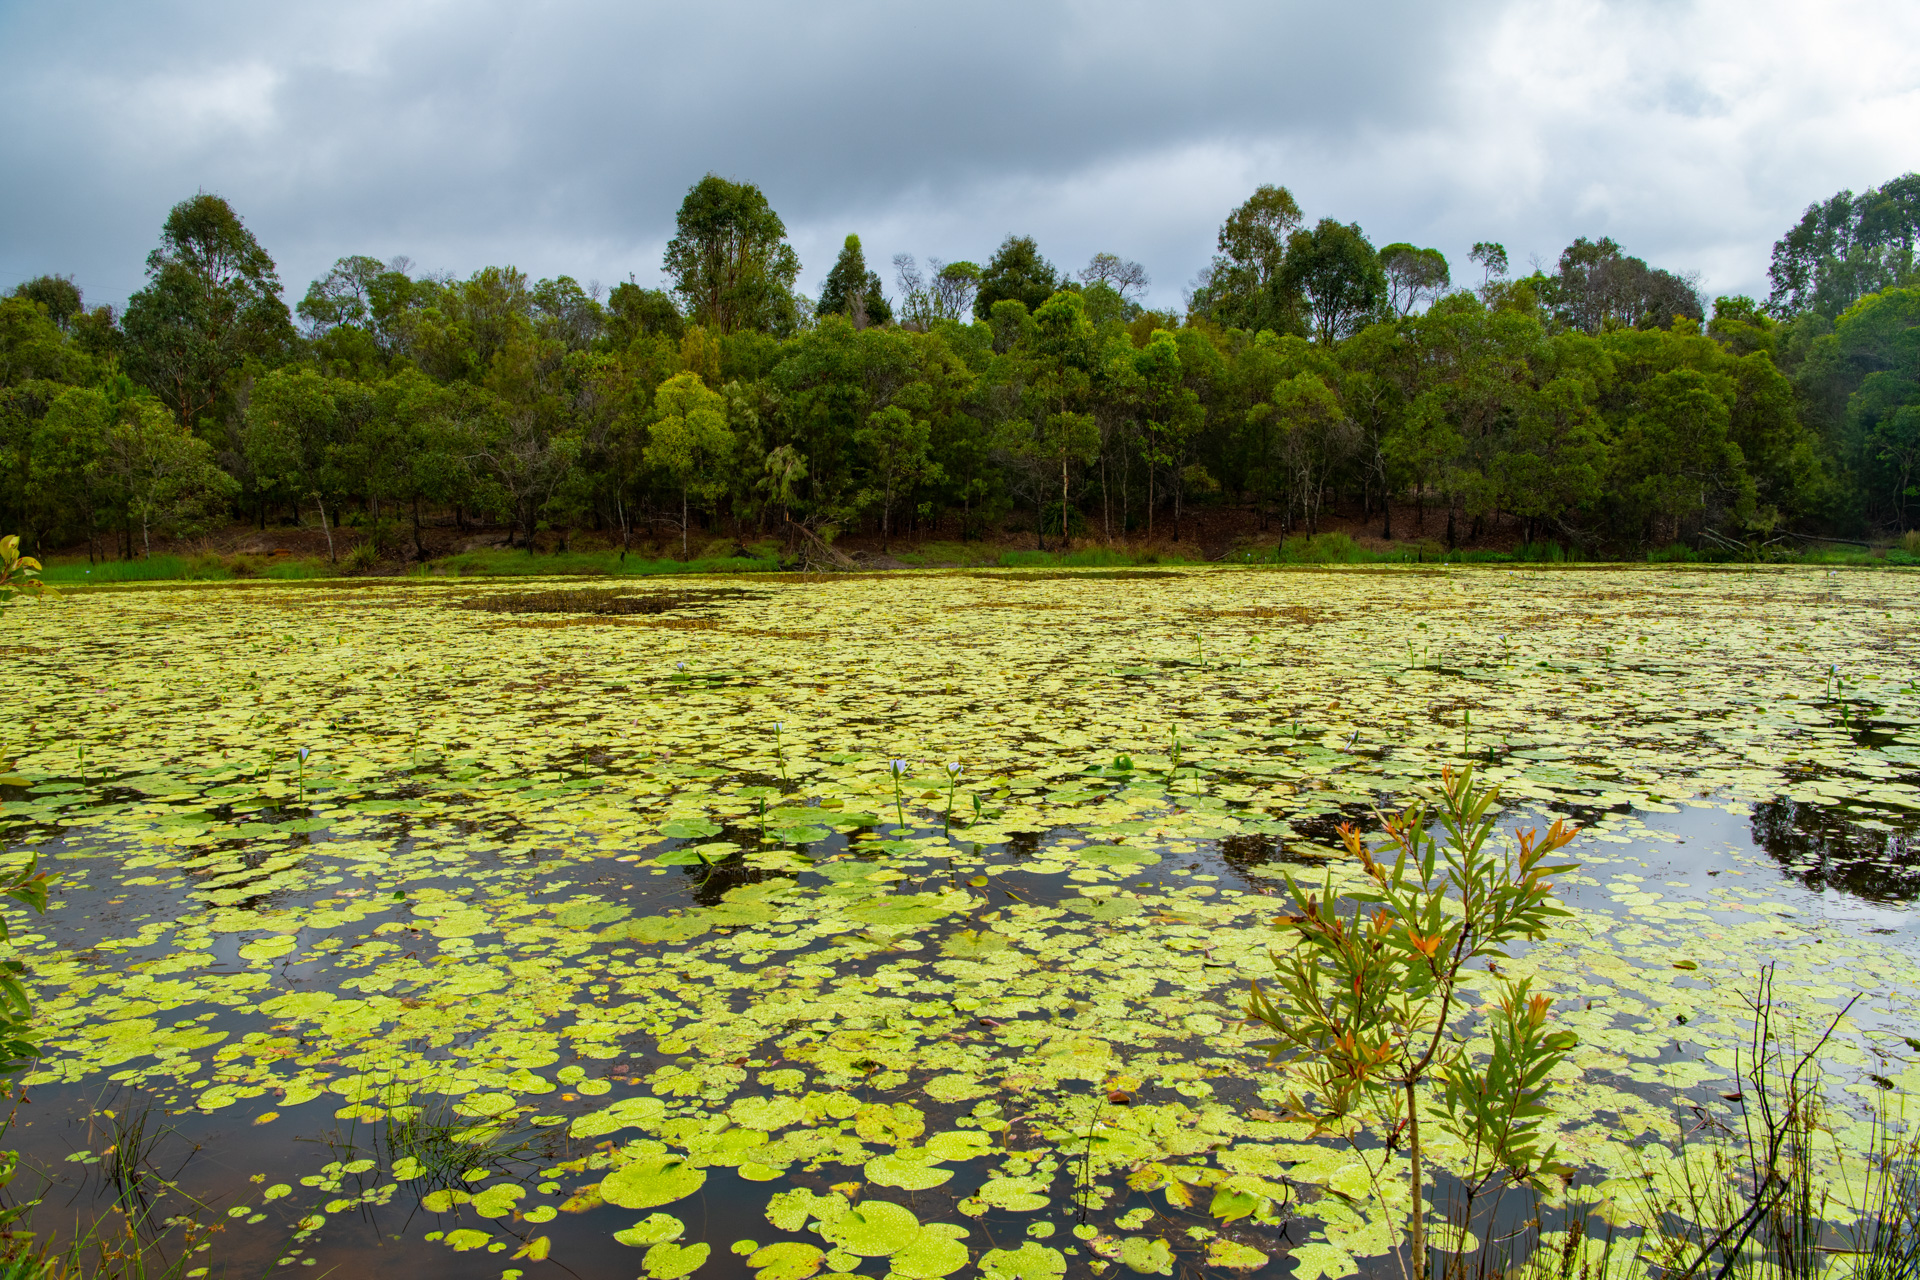 Waterlilies and other macrophytes at Berrinba Wetlands. Photo by Gary Cranitch © Queensland Museum